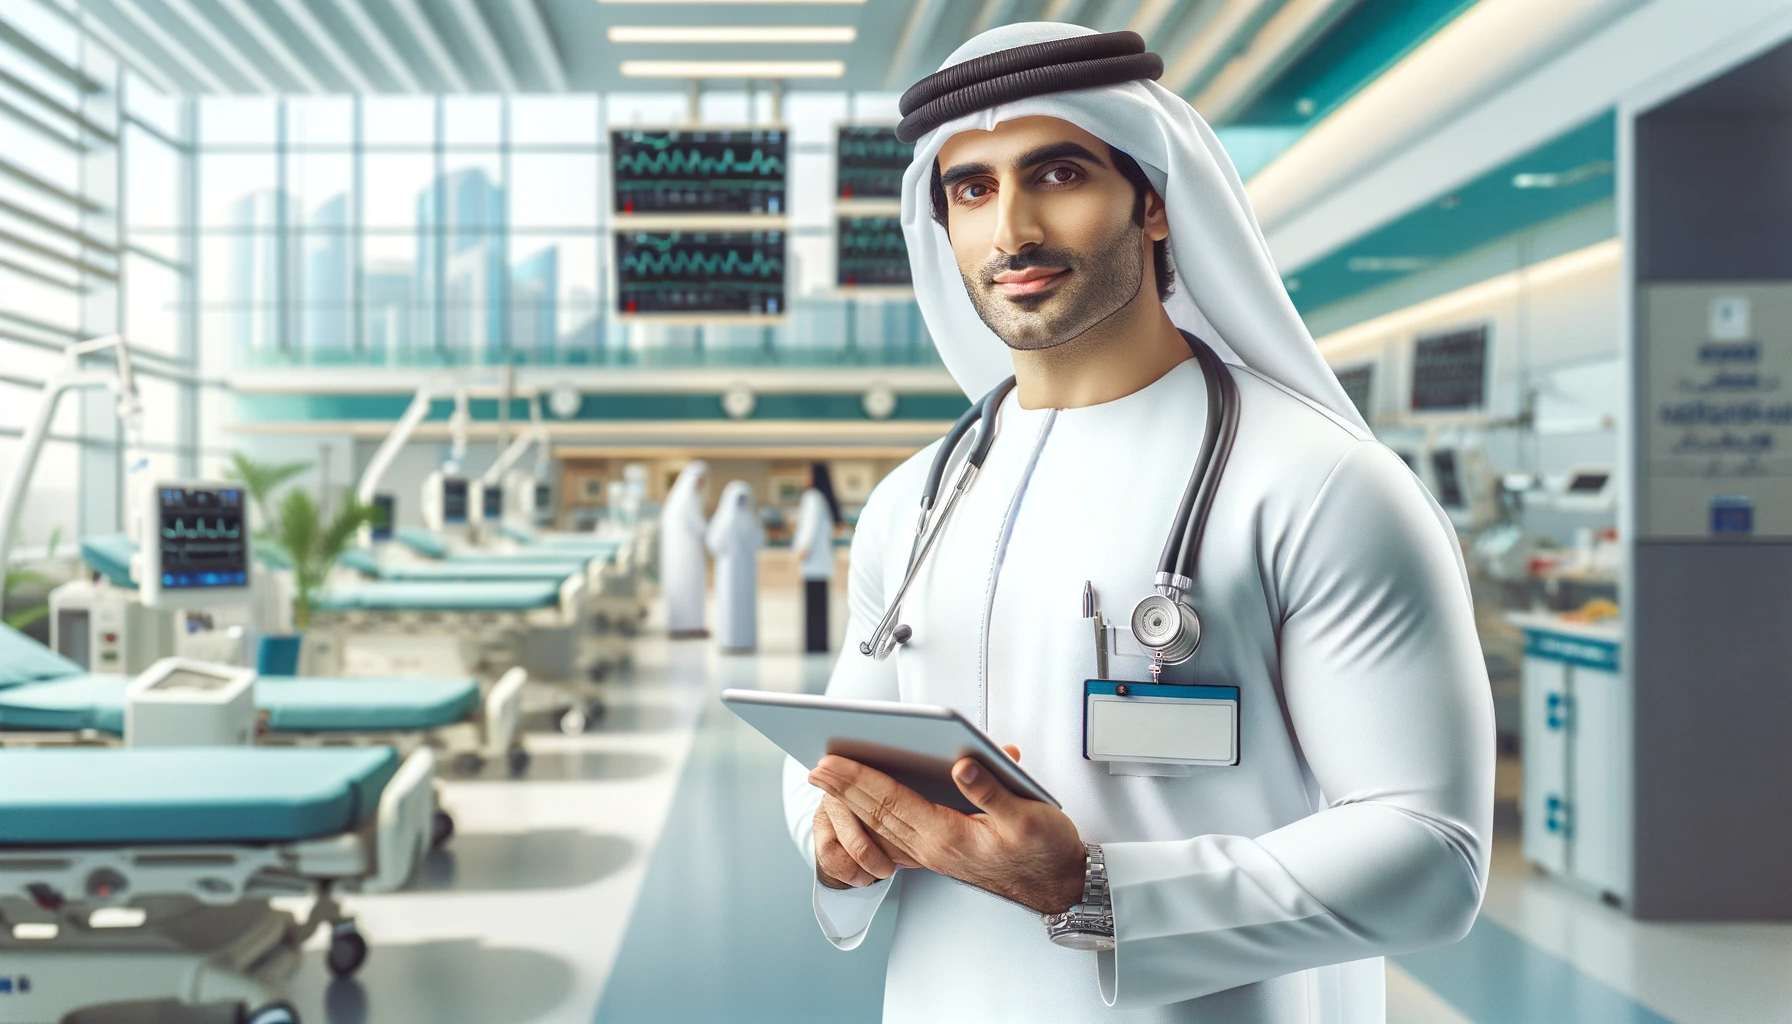 DALL·E 2024 01 25 15.37.08 A realistic portrayal of an Emirati healthcare professional in Abu Dhabis hospital setting. The image shows a confident and skilled Emirati doctor or